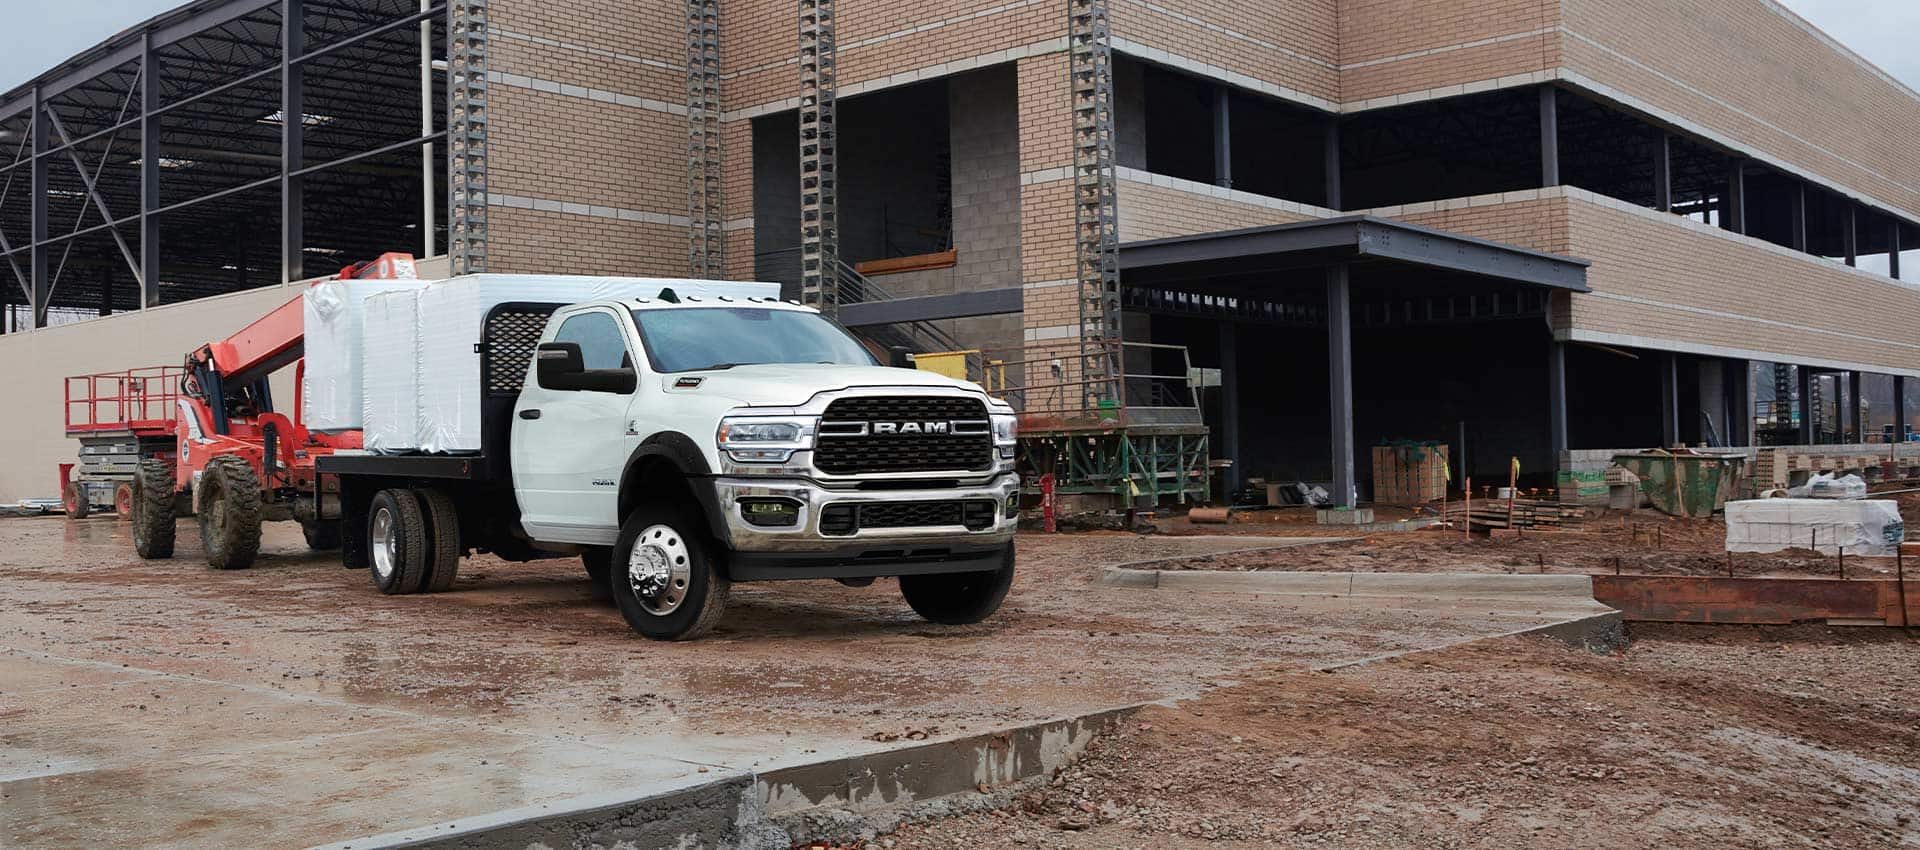 A white 2024 Ram Chassis Cab with a platform upfit loaded with building materials, parked at a commercial construction site.